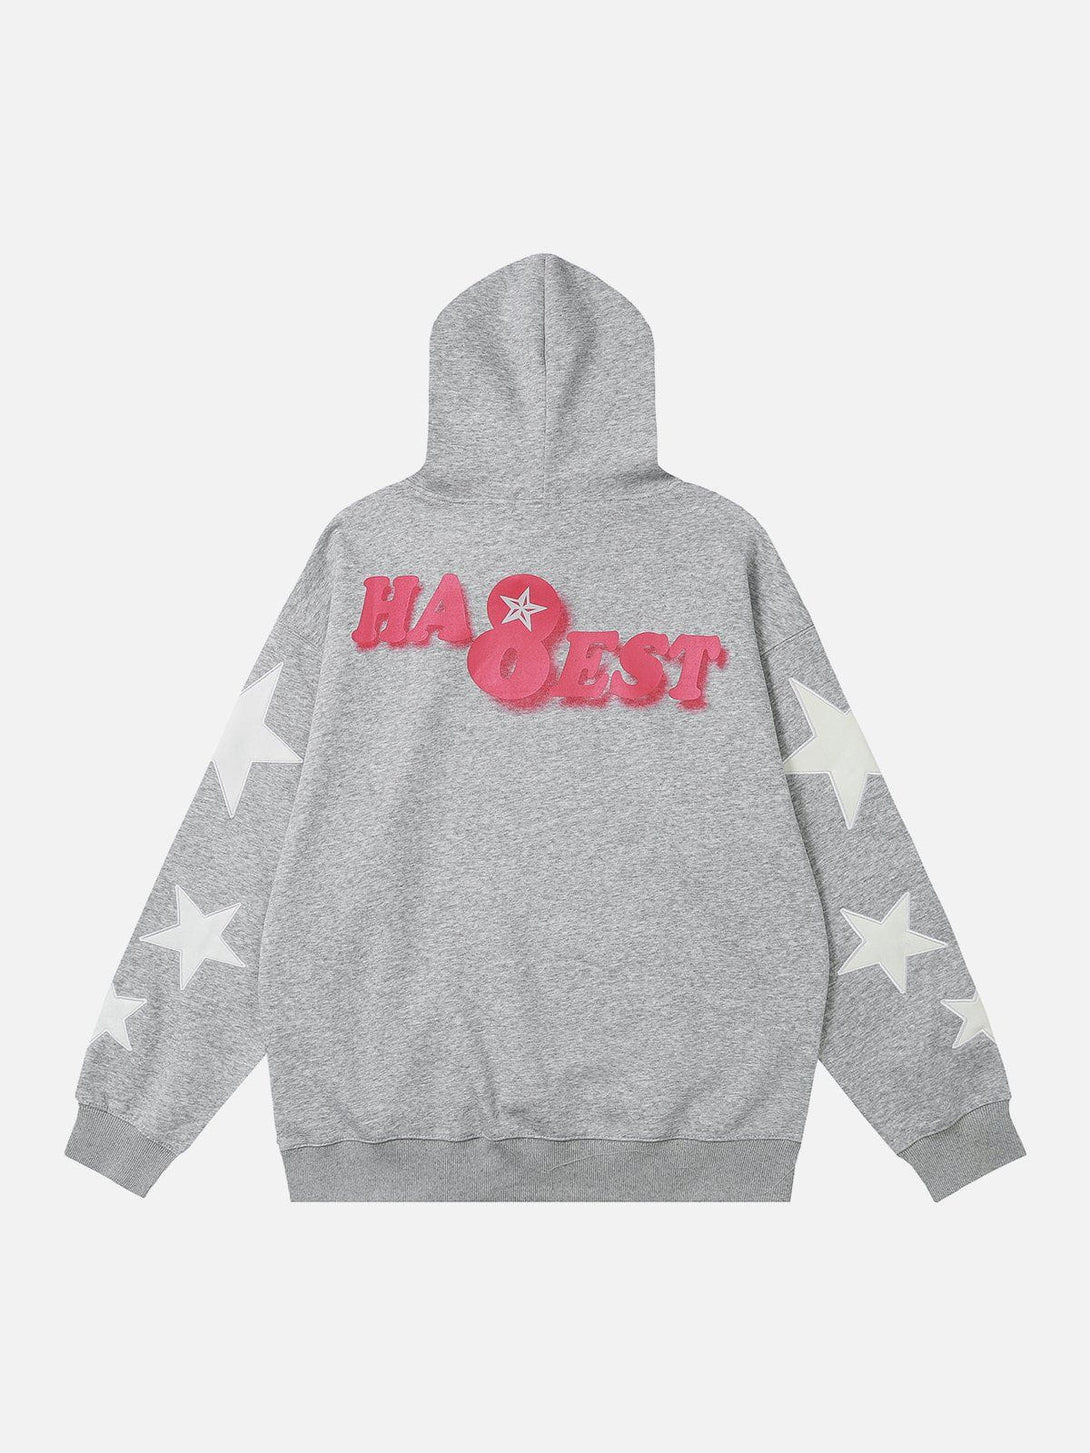 Levefly - Letter Printing Star Embroidery Hoodie - Streetwear Fashion - levefly.com